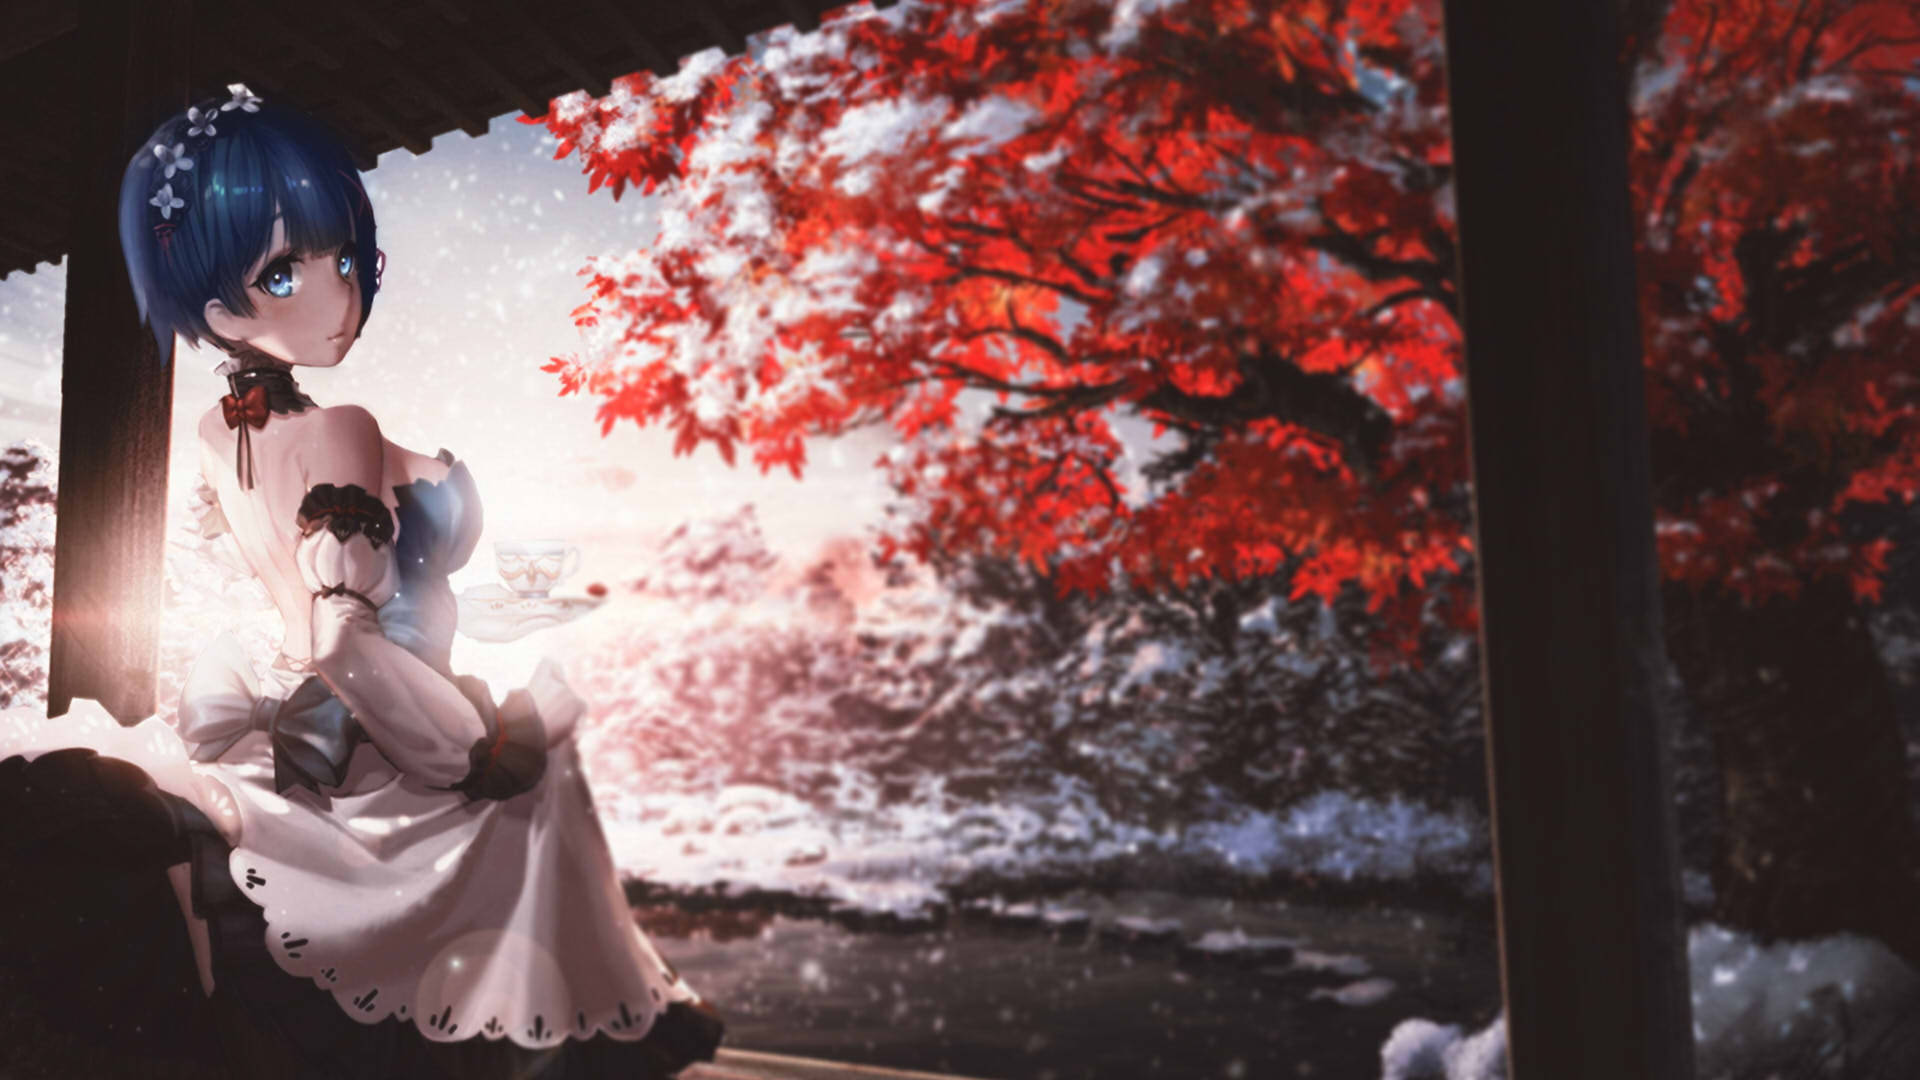 Animated Rem And Red Leaves In Winter